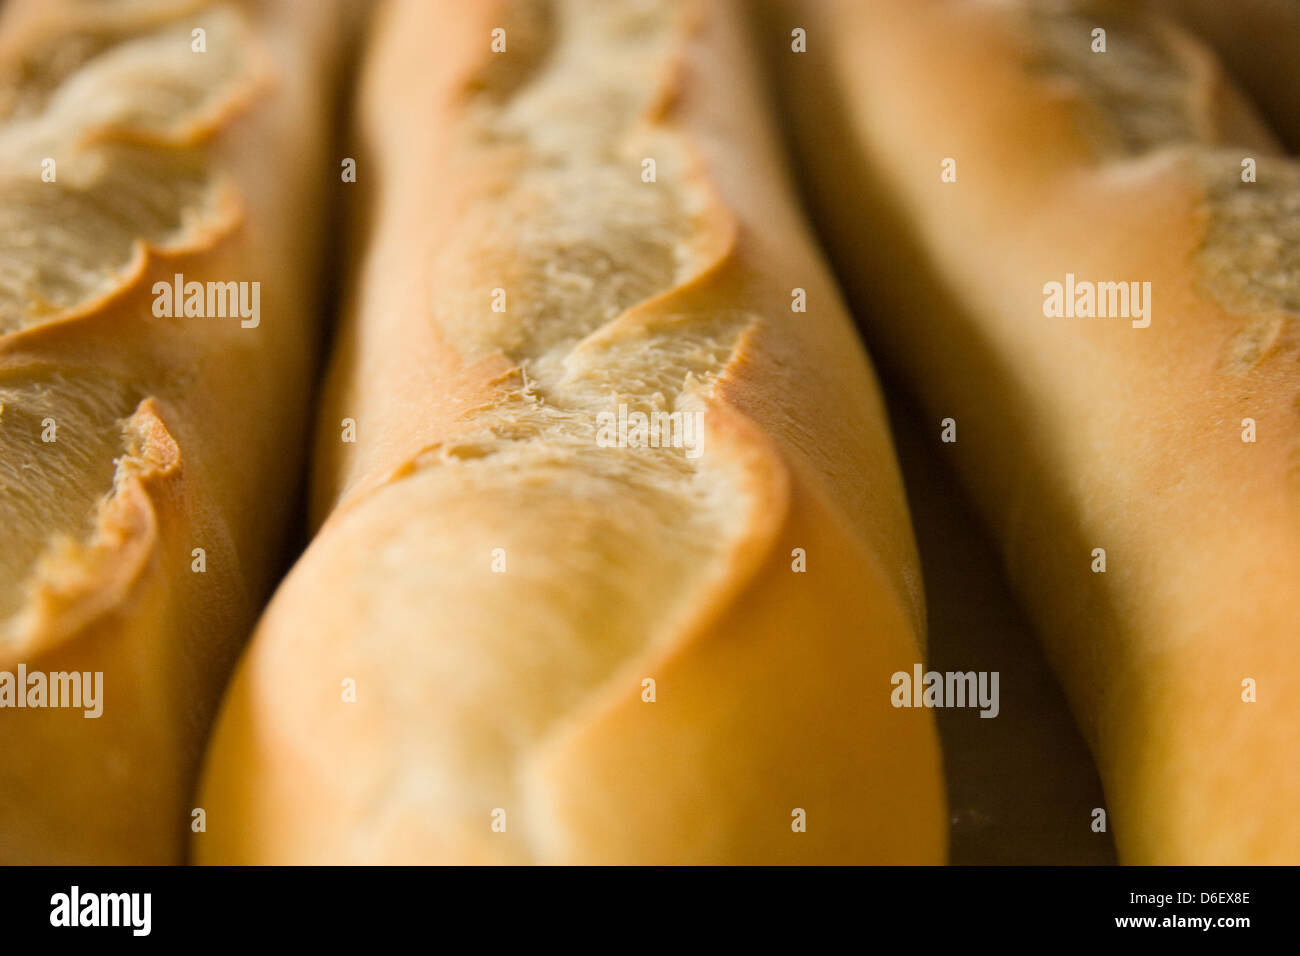 Close-up view of freshly baked baguettes from a French bakery Stock Photo